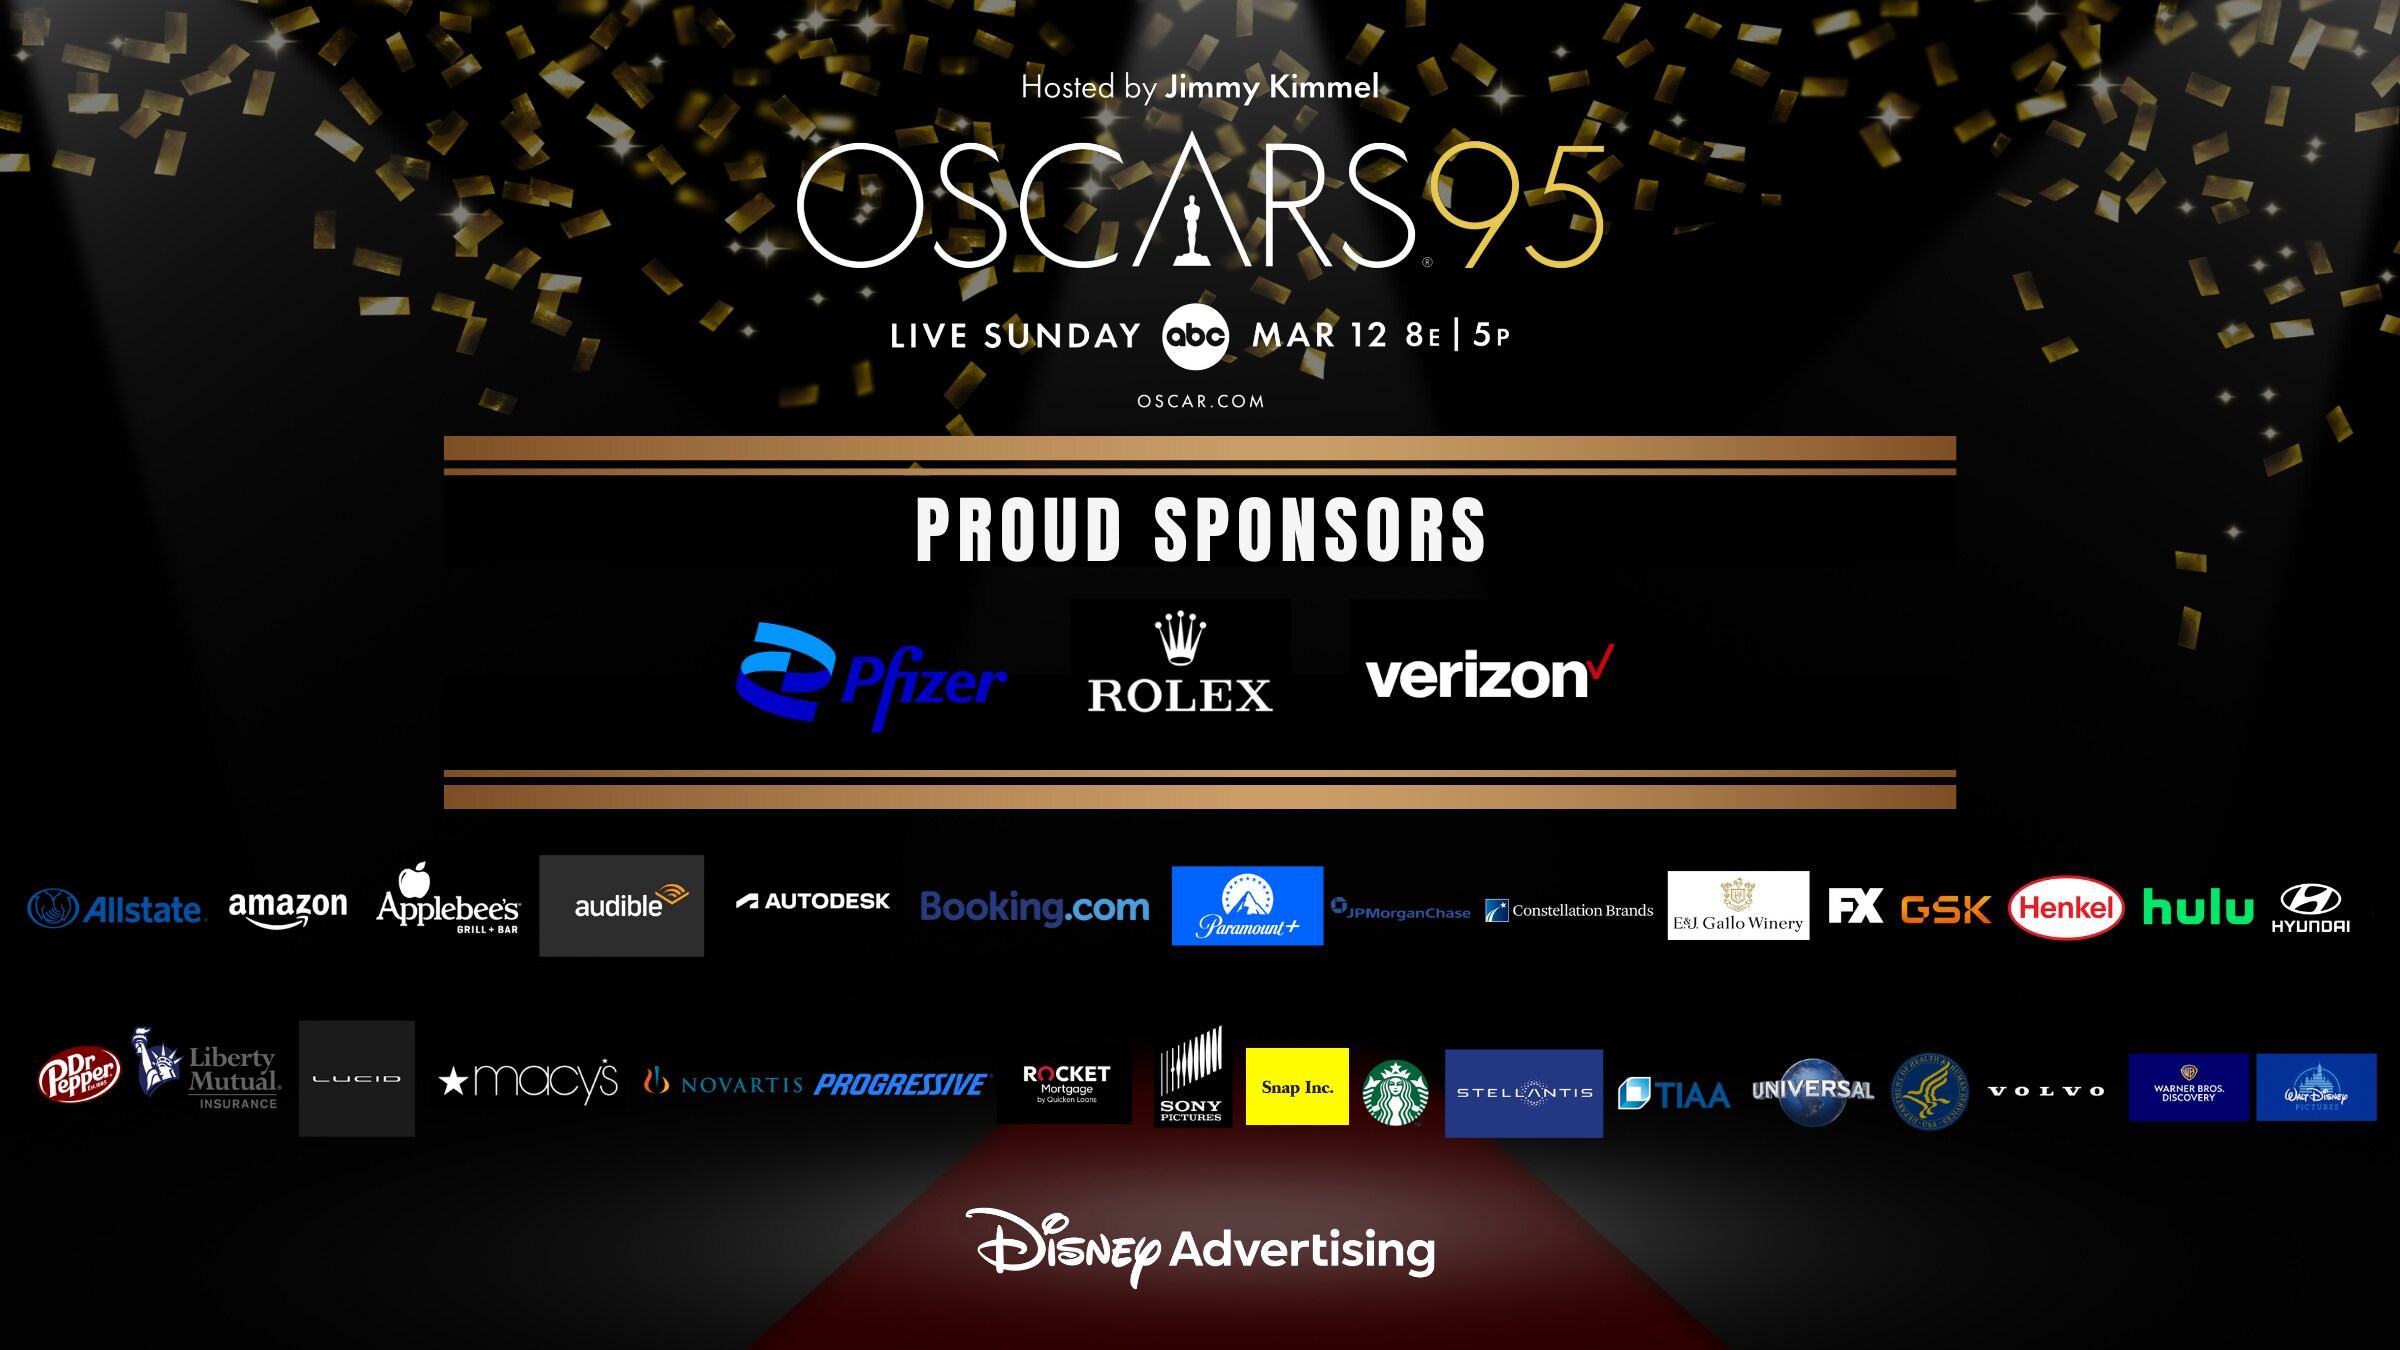 Disney Advertising Sales Sells Out of Ad Inventory for the 95th Oscars Telecast  